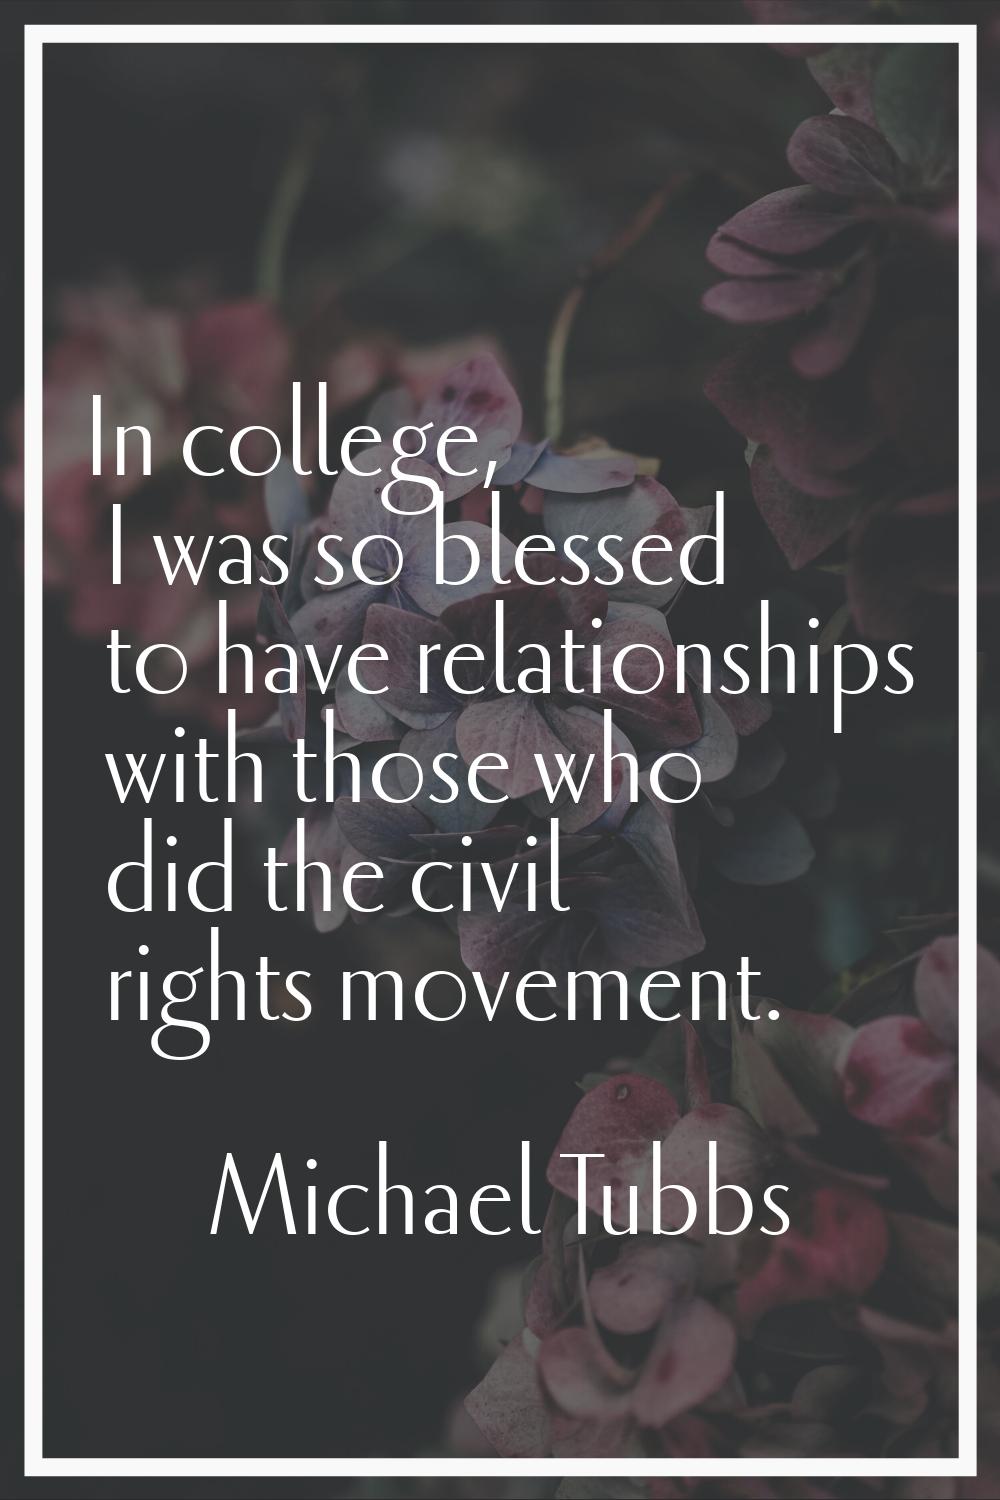 In college, I was so blessed to have relationships with those who did the civil rights movement.